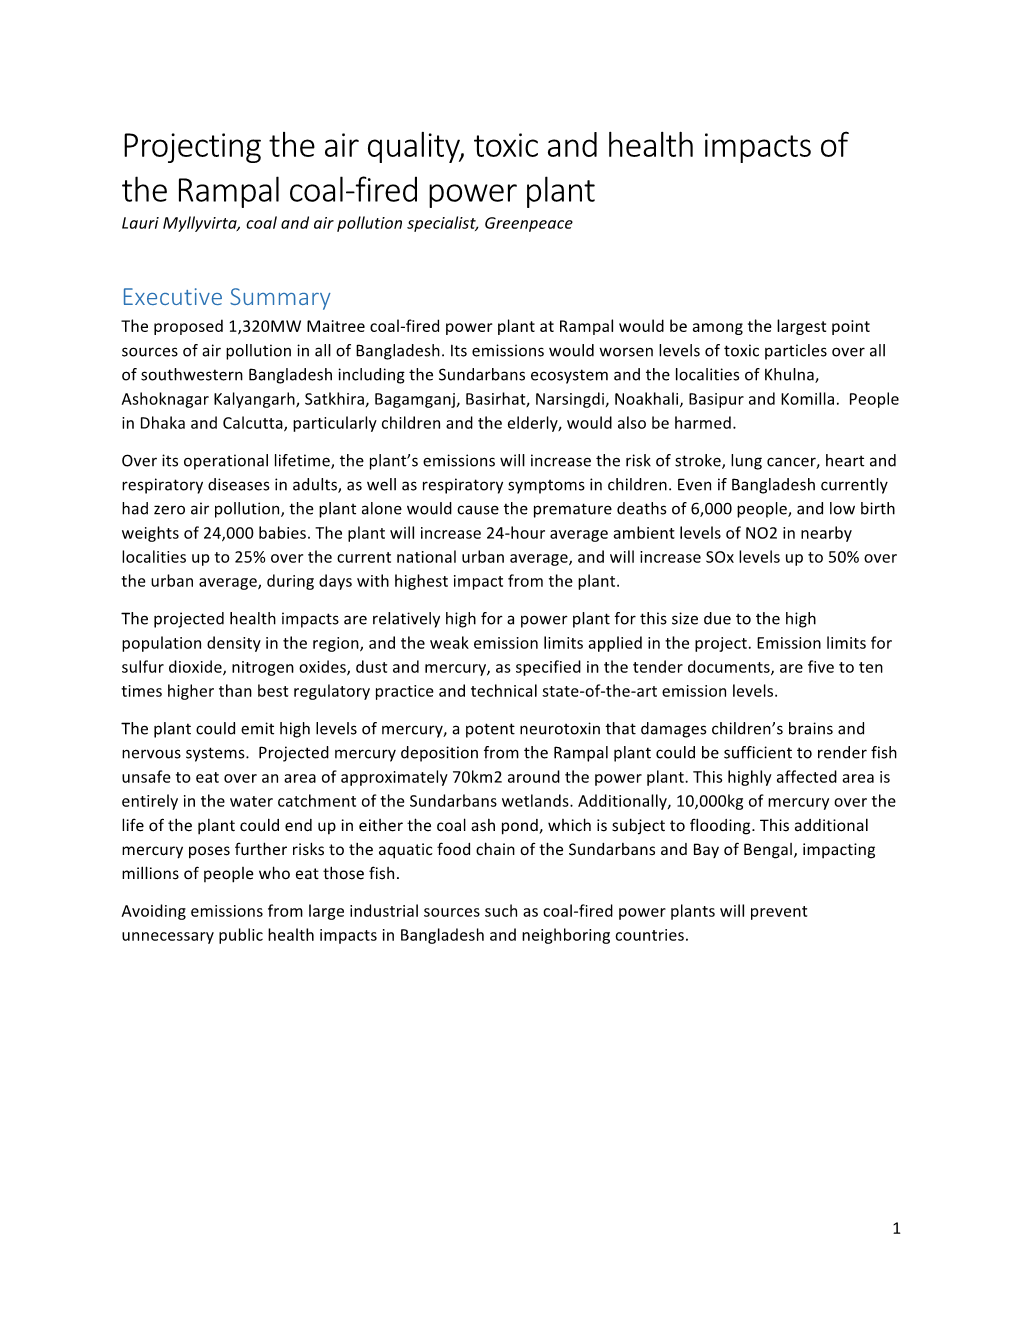 Projecting the Air Quality, Toxic and Health Impacts of the Rampal Coal-‐Fired Power Plant